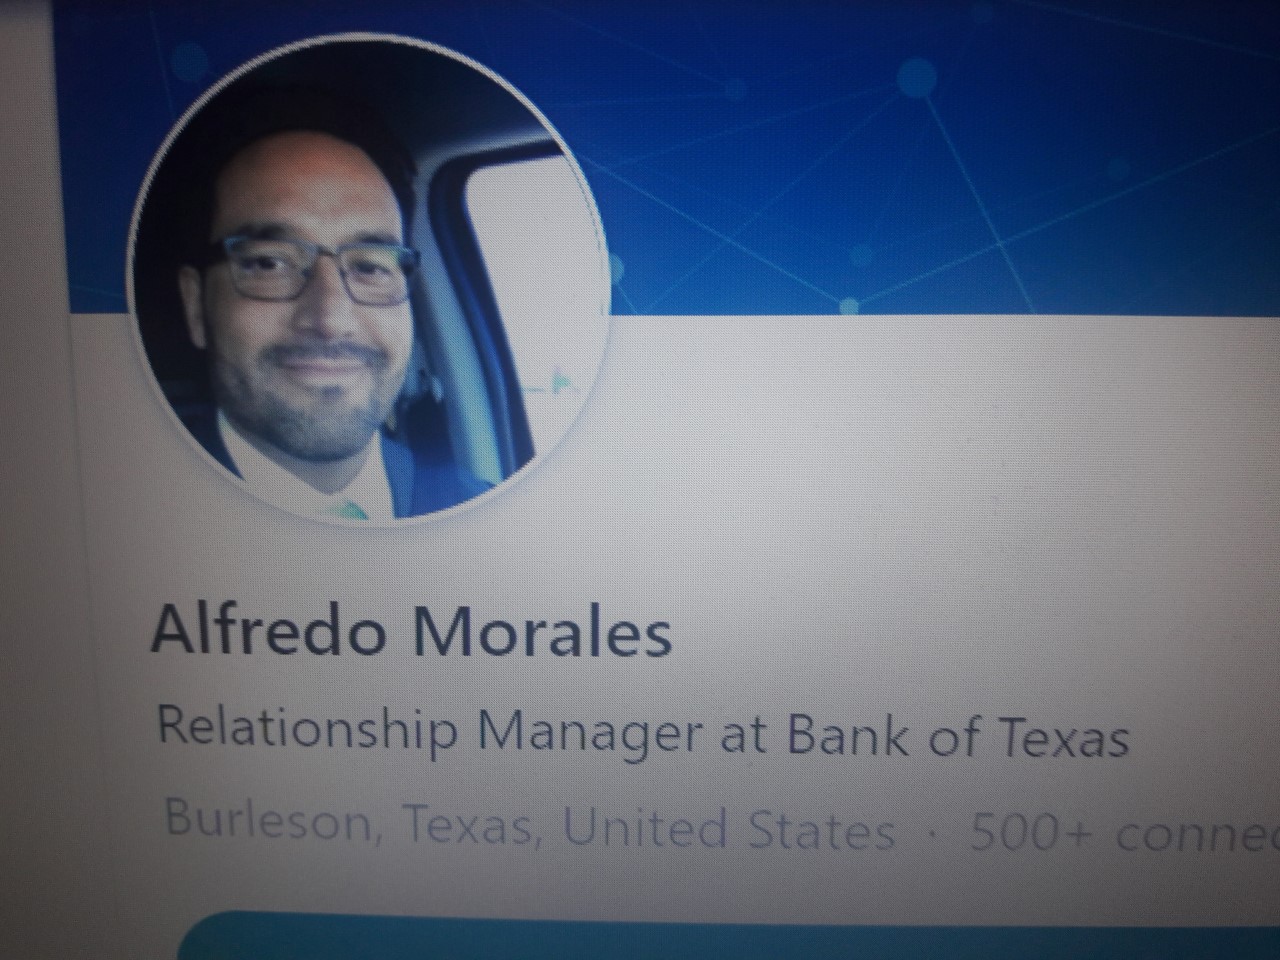 His current position at Bank of Texas.